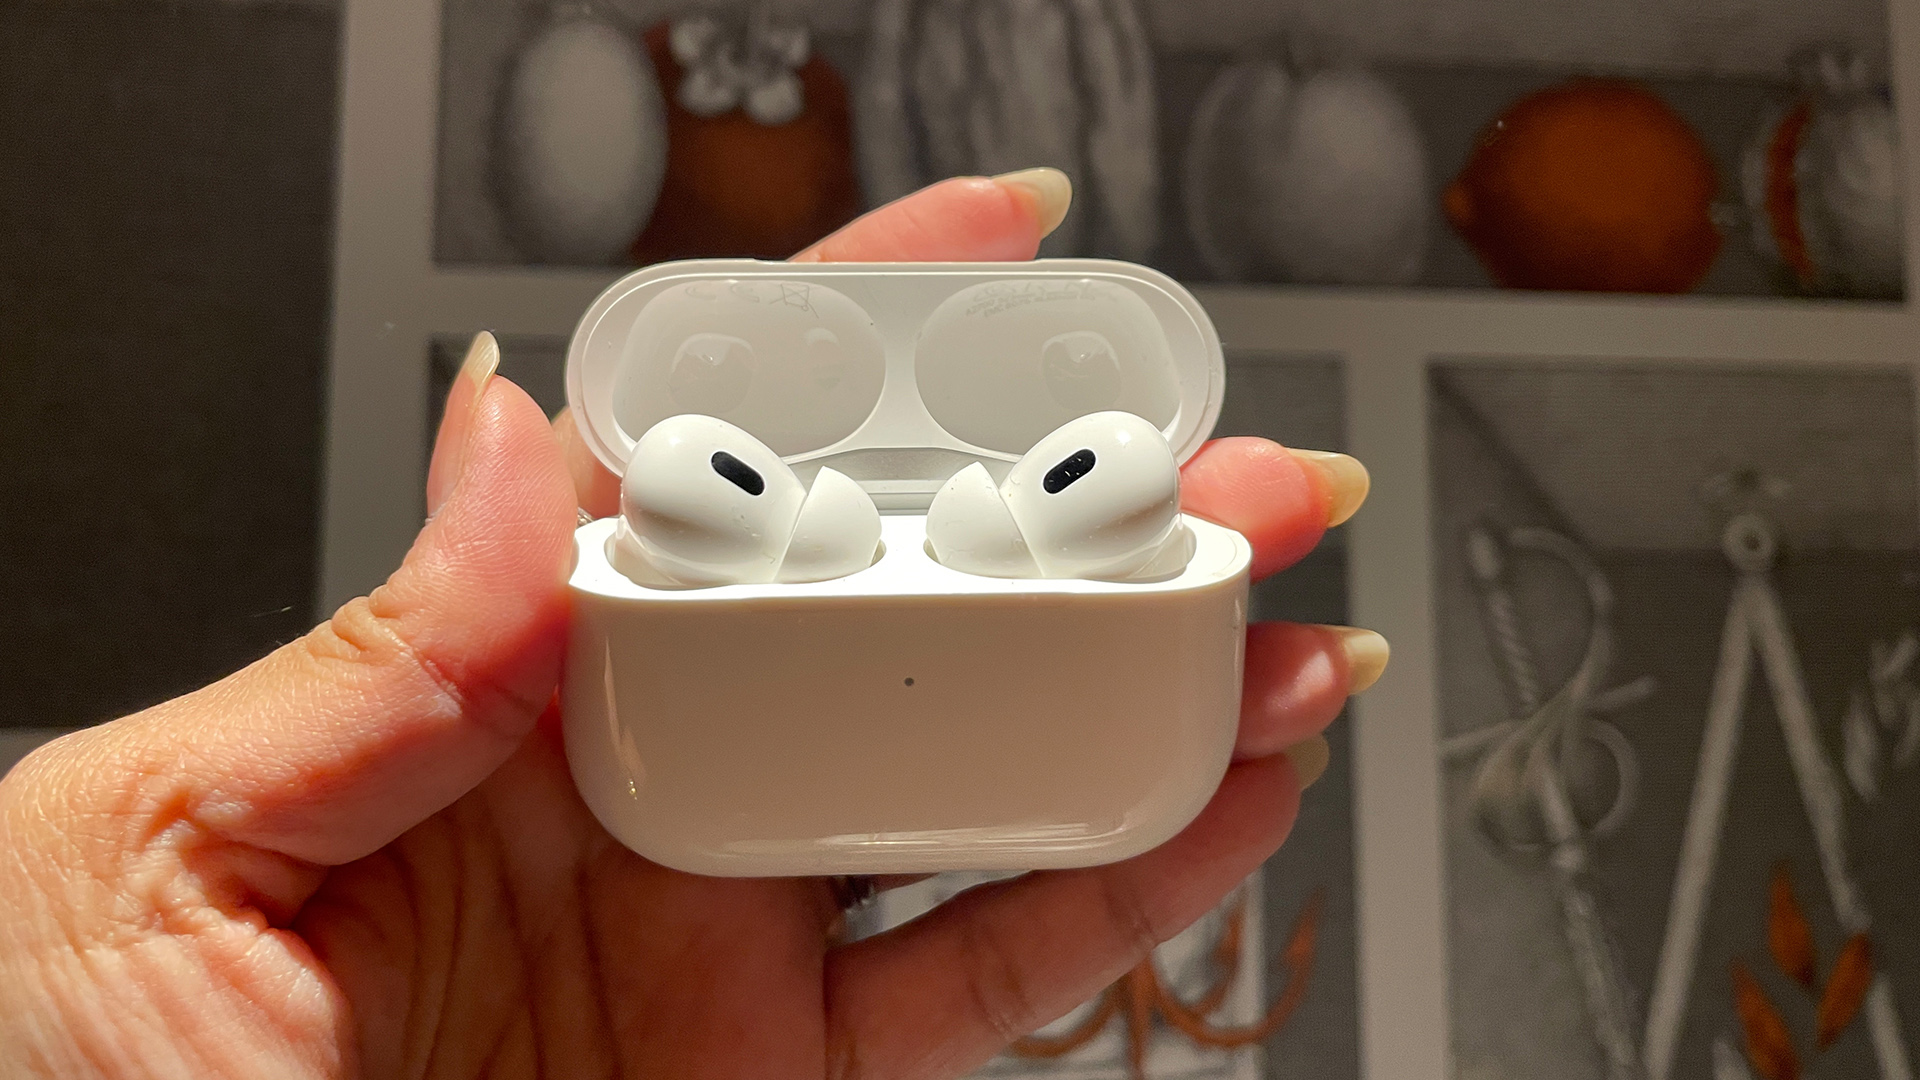 Apple AirPods Pro 2 earbuds review: five-star stunner What